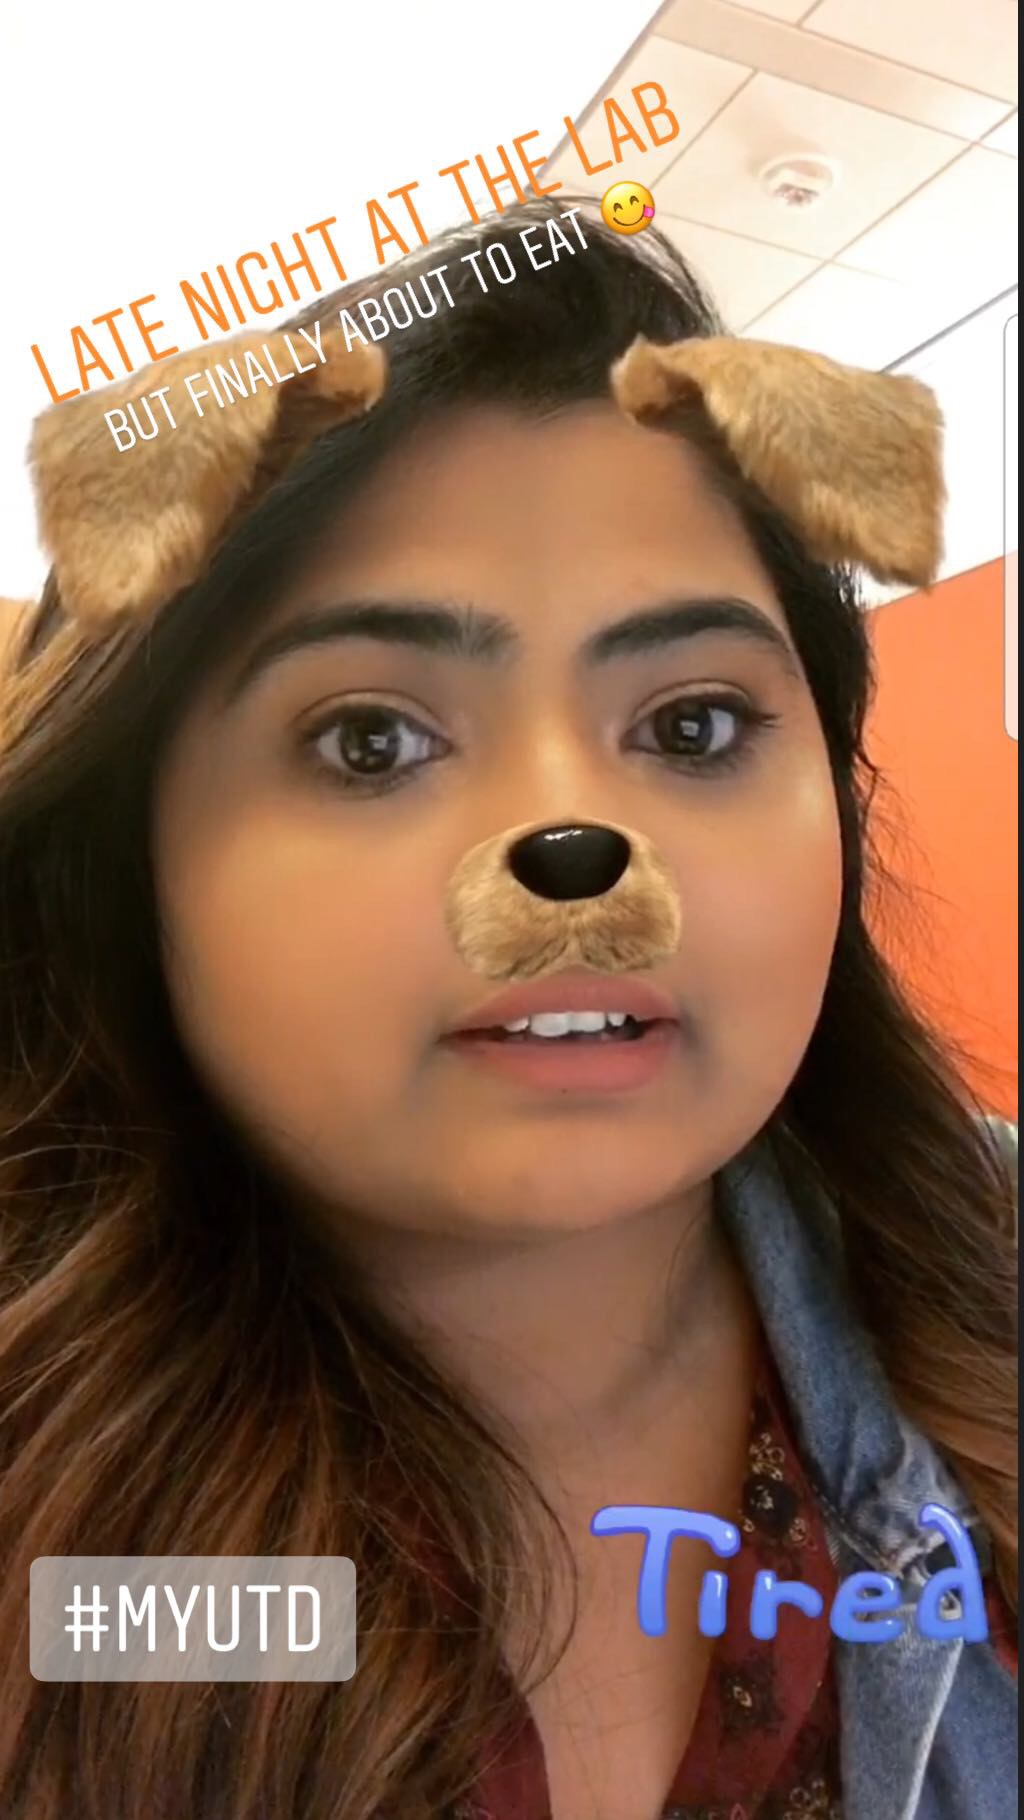 Selfie of Shivangi with added dog nose and floppy dog ears.